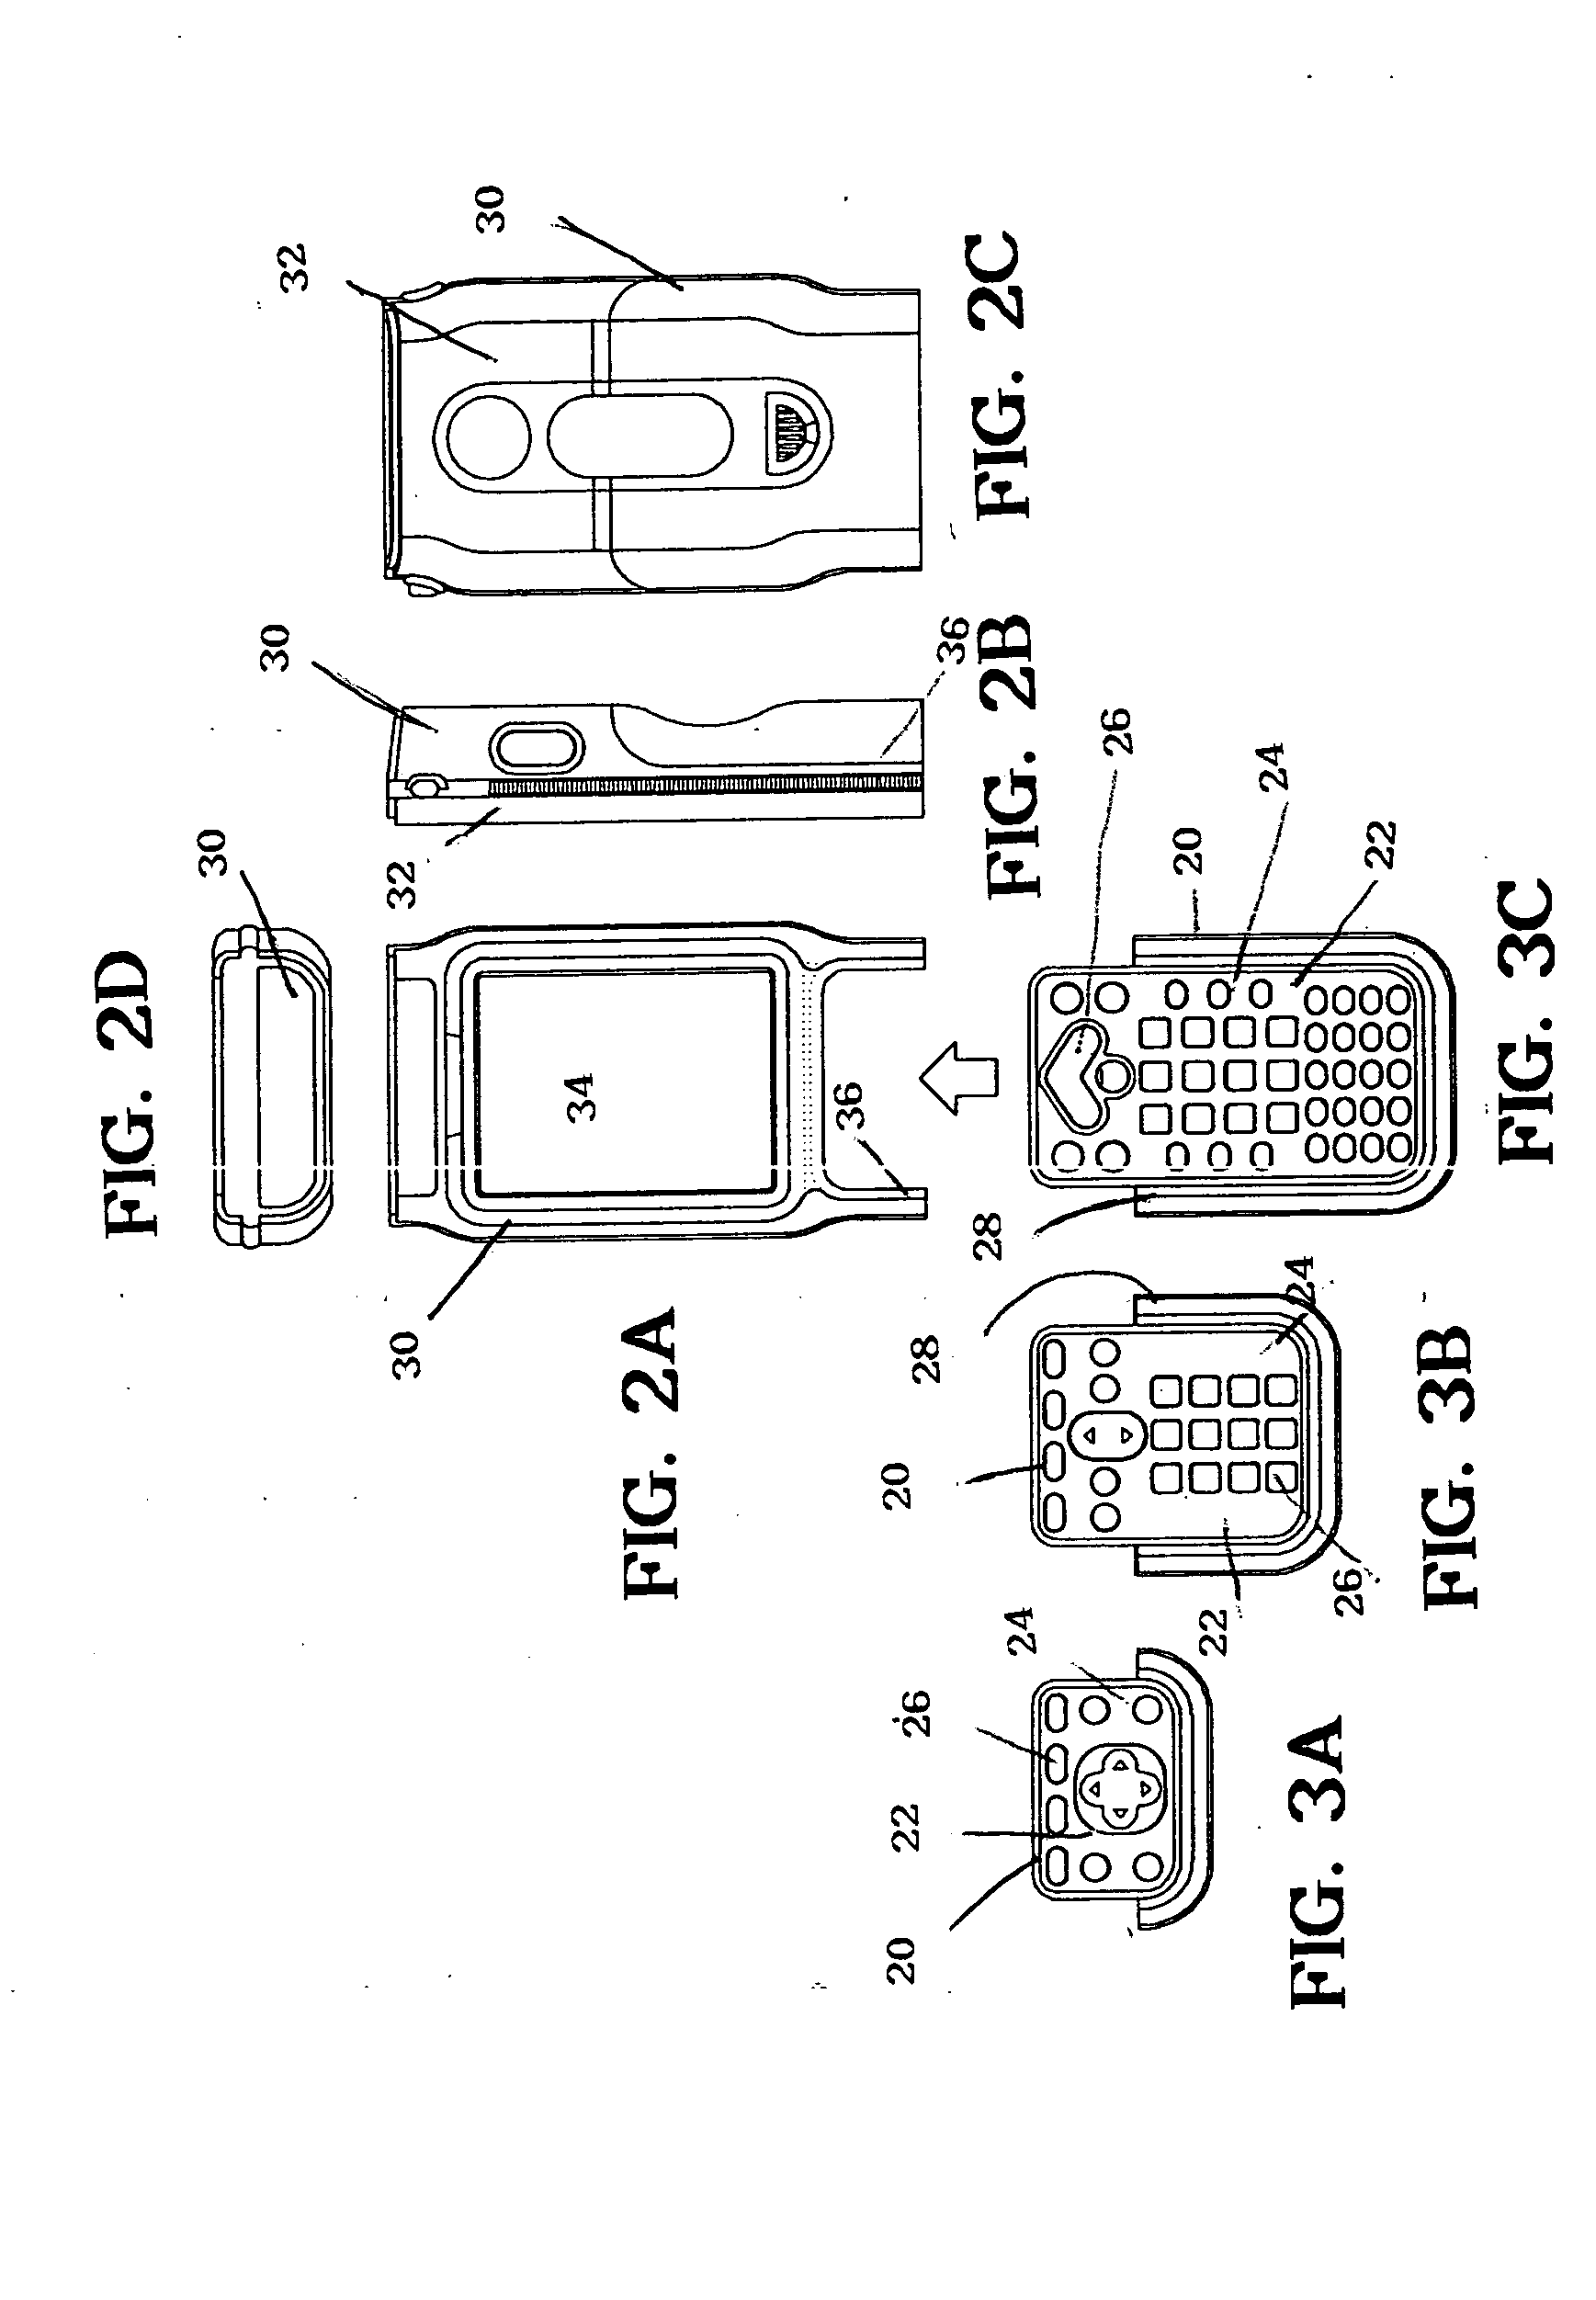 Handheld computer with interchangeable keypad/battery module